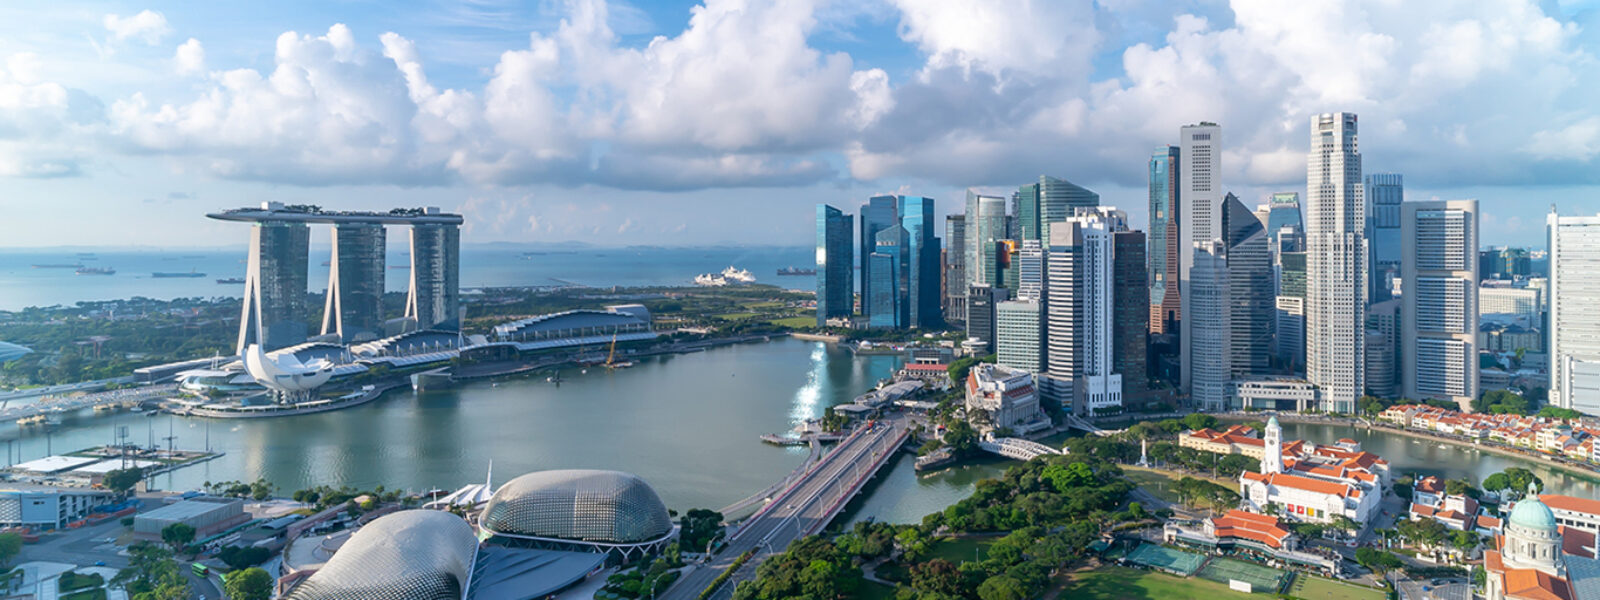 UOBKH: Monthly Review and Outlook – Singapore